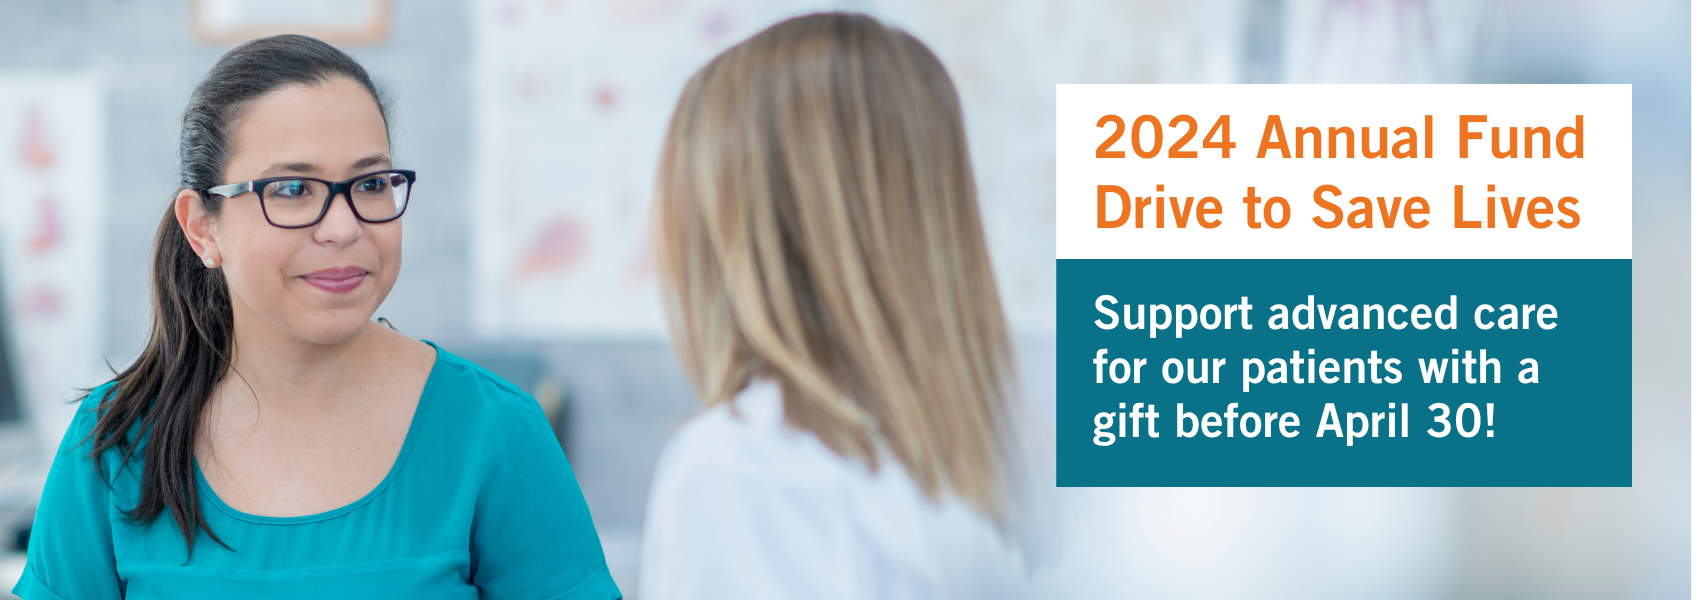 A female patient talks with a physician in an exam room. Copy reads "2024 Annual Fund Drive to Save Lives. Support advanced care for our patients with a gift before April 30!" 